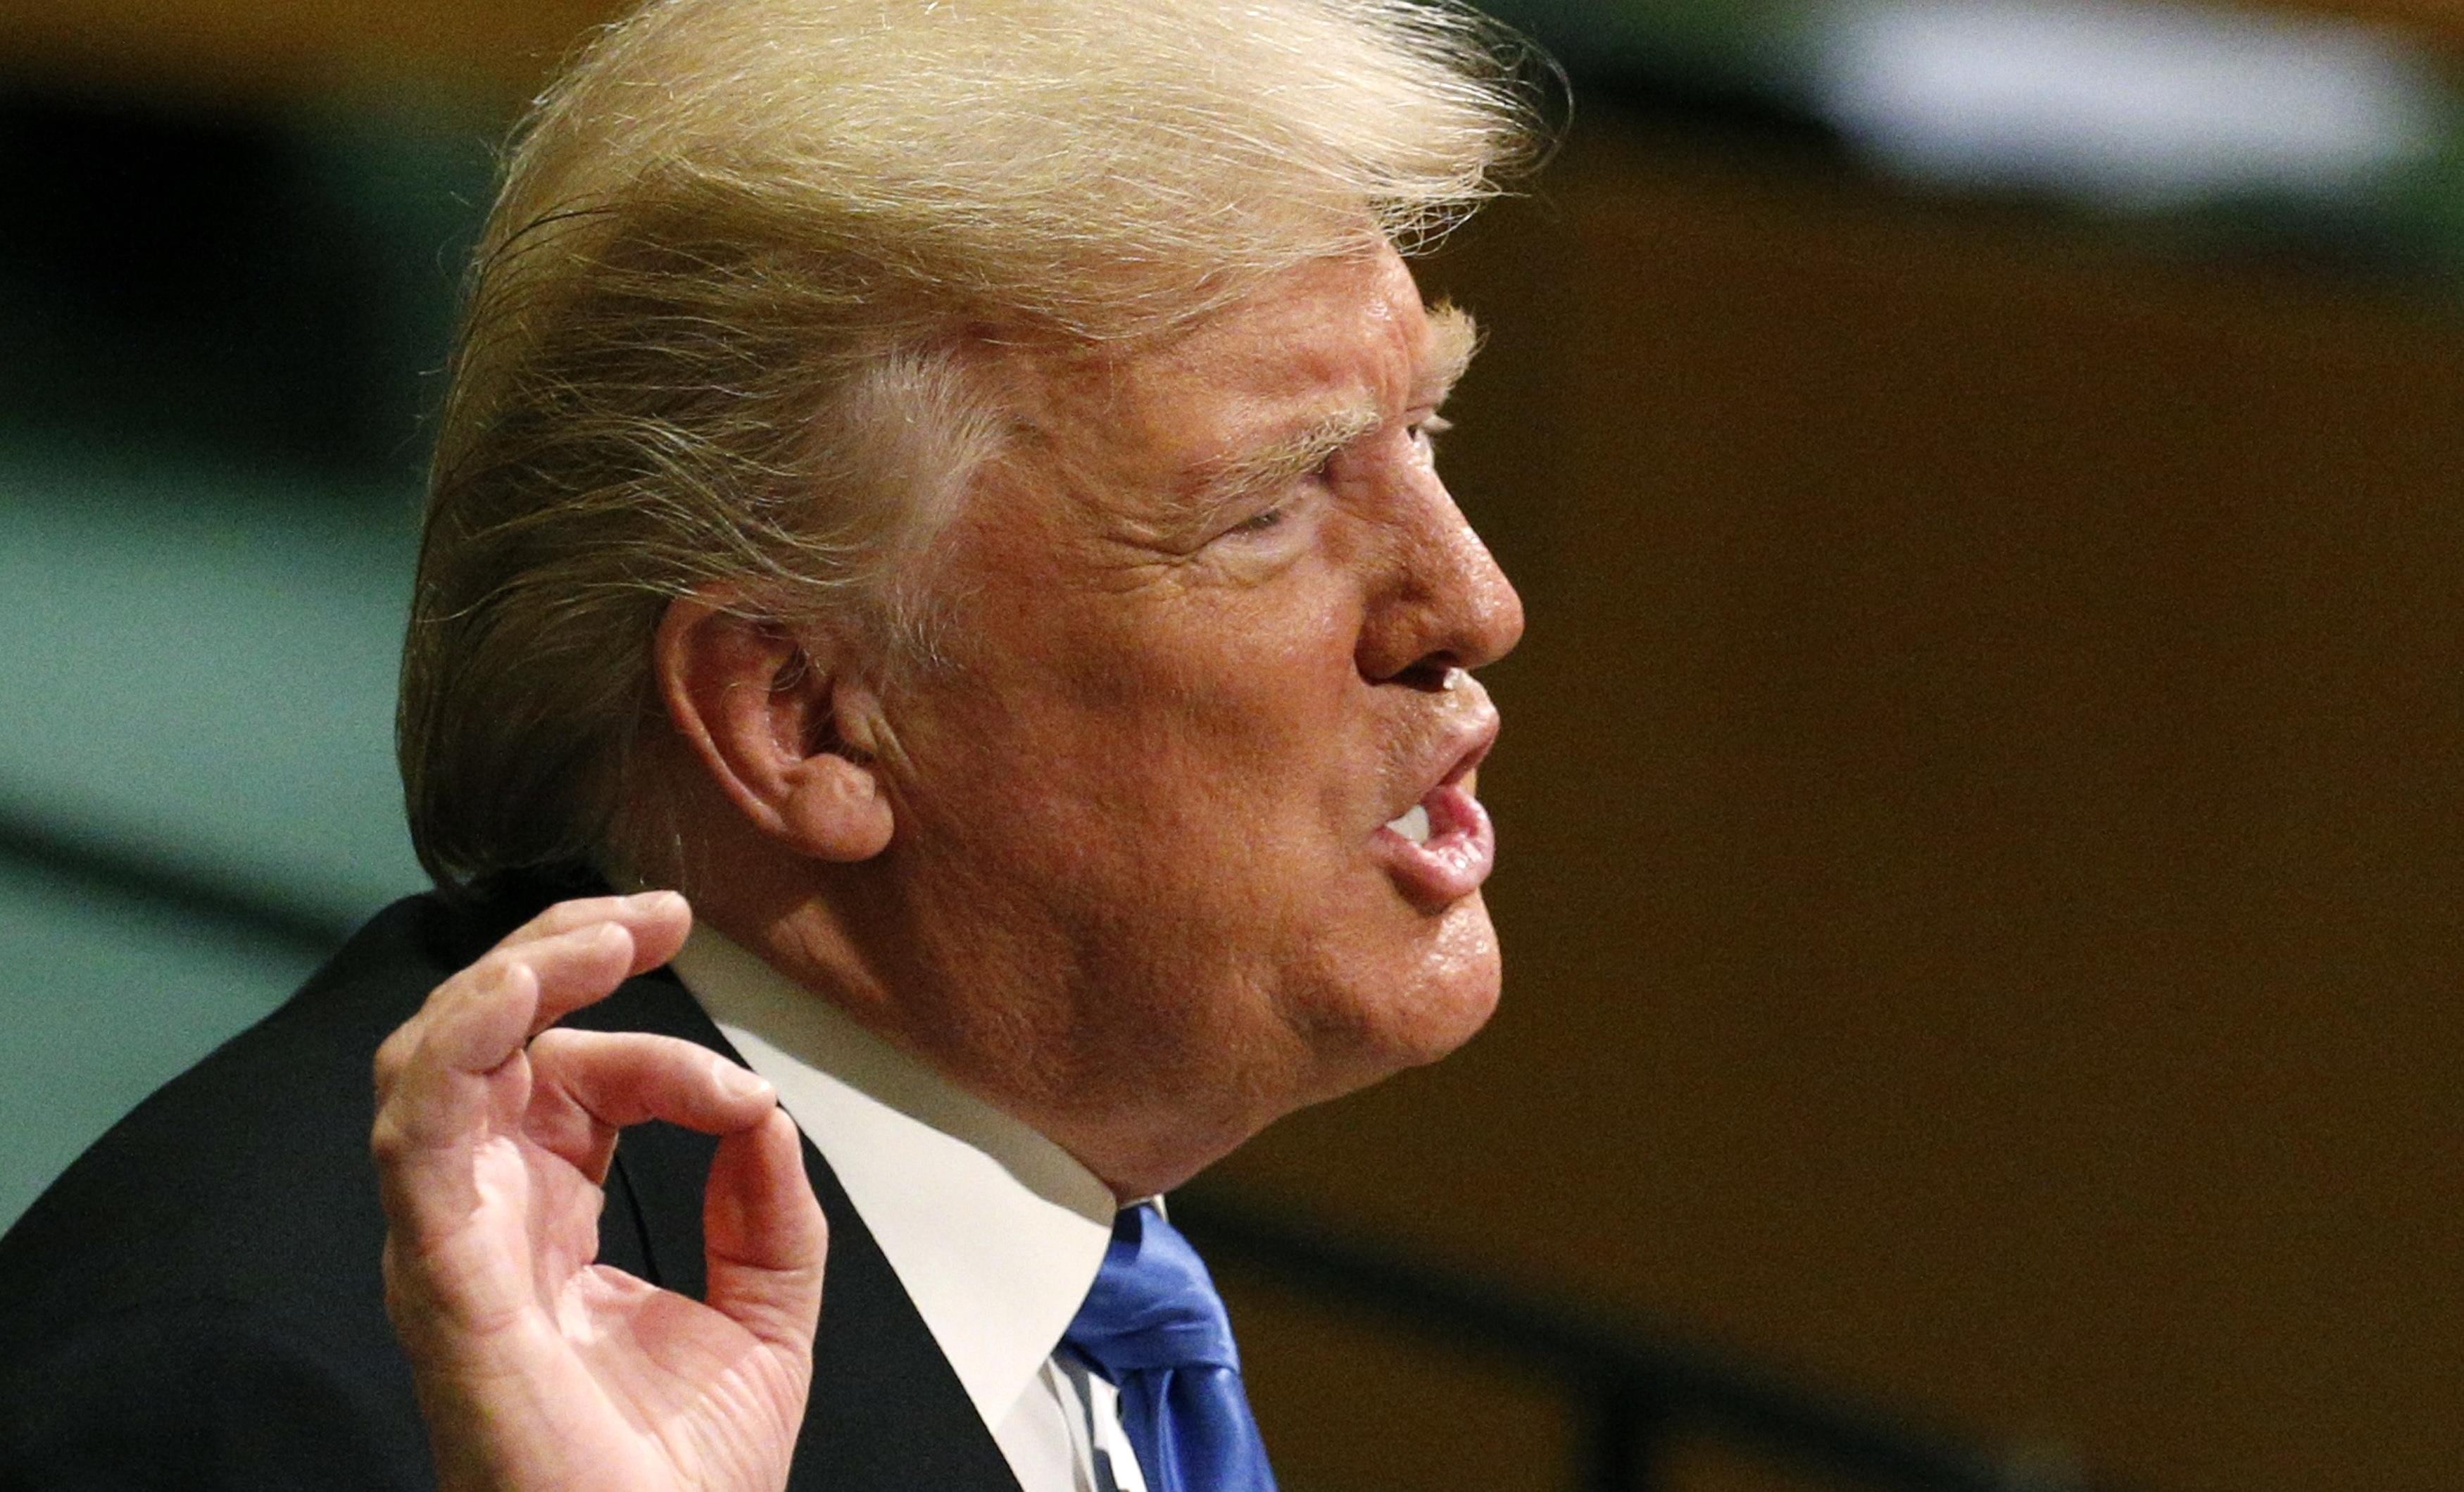 US President Donald Trump addresses the 72nd United Nations General Assembly at the UN headquarters in New York, on September 19. Photo: Reuters